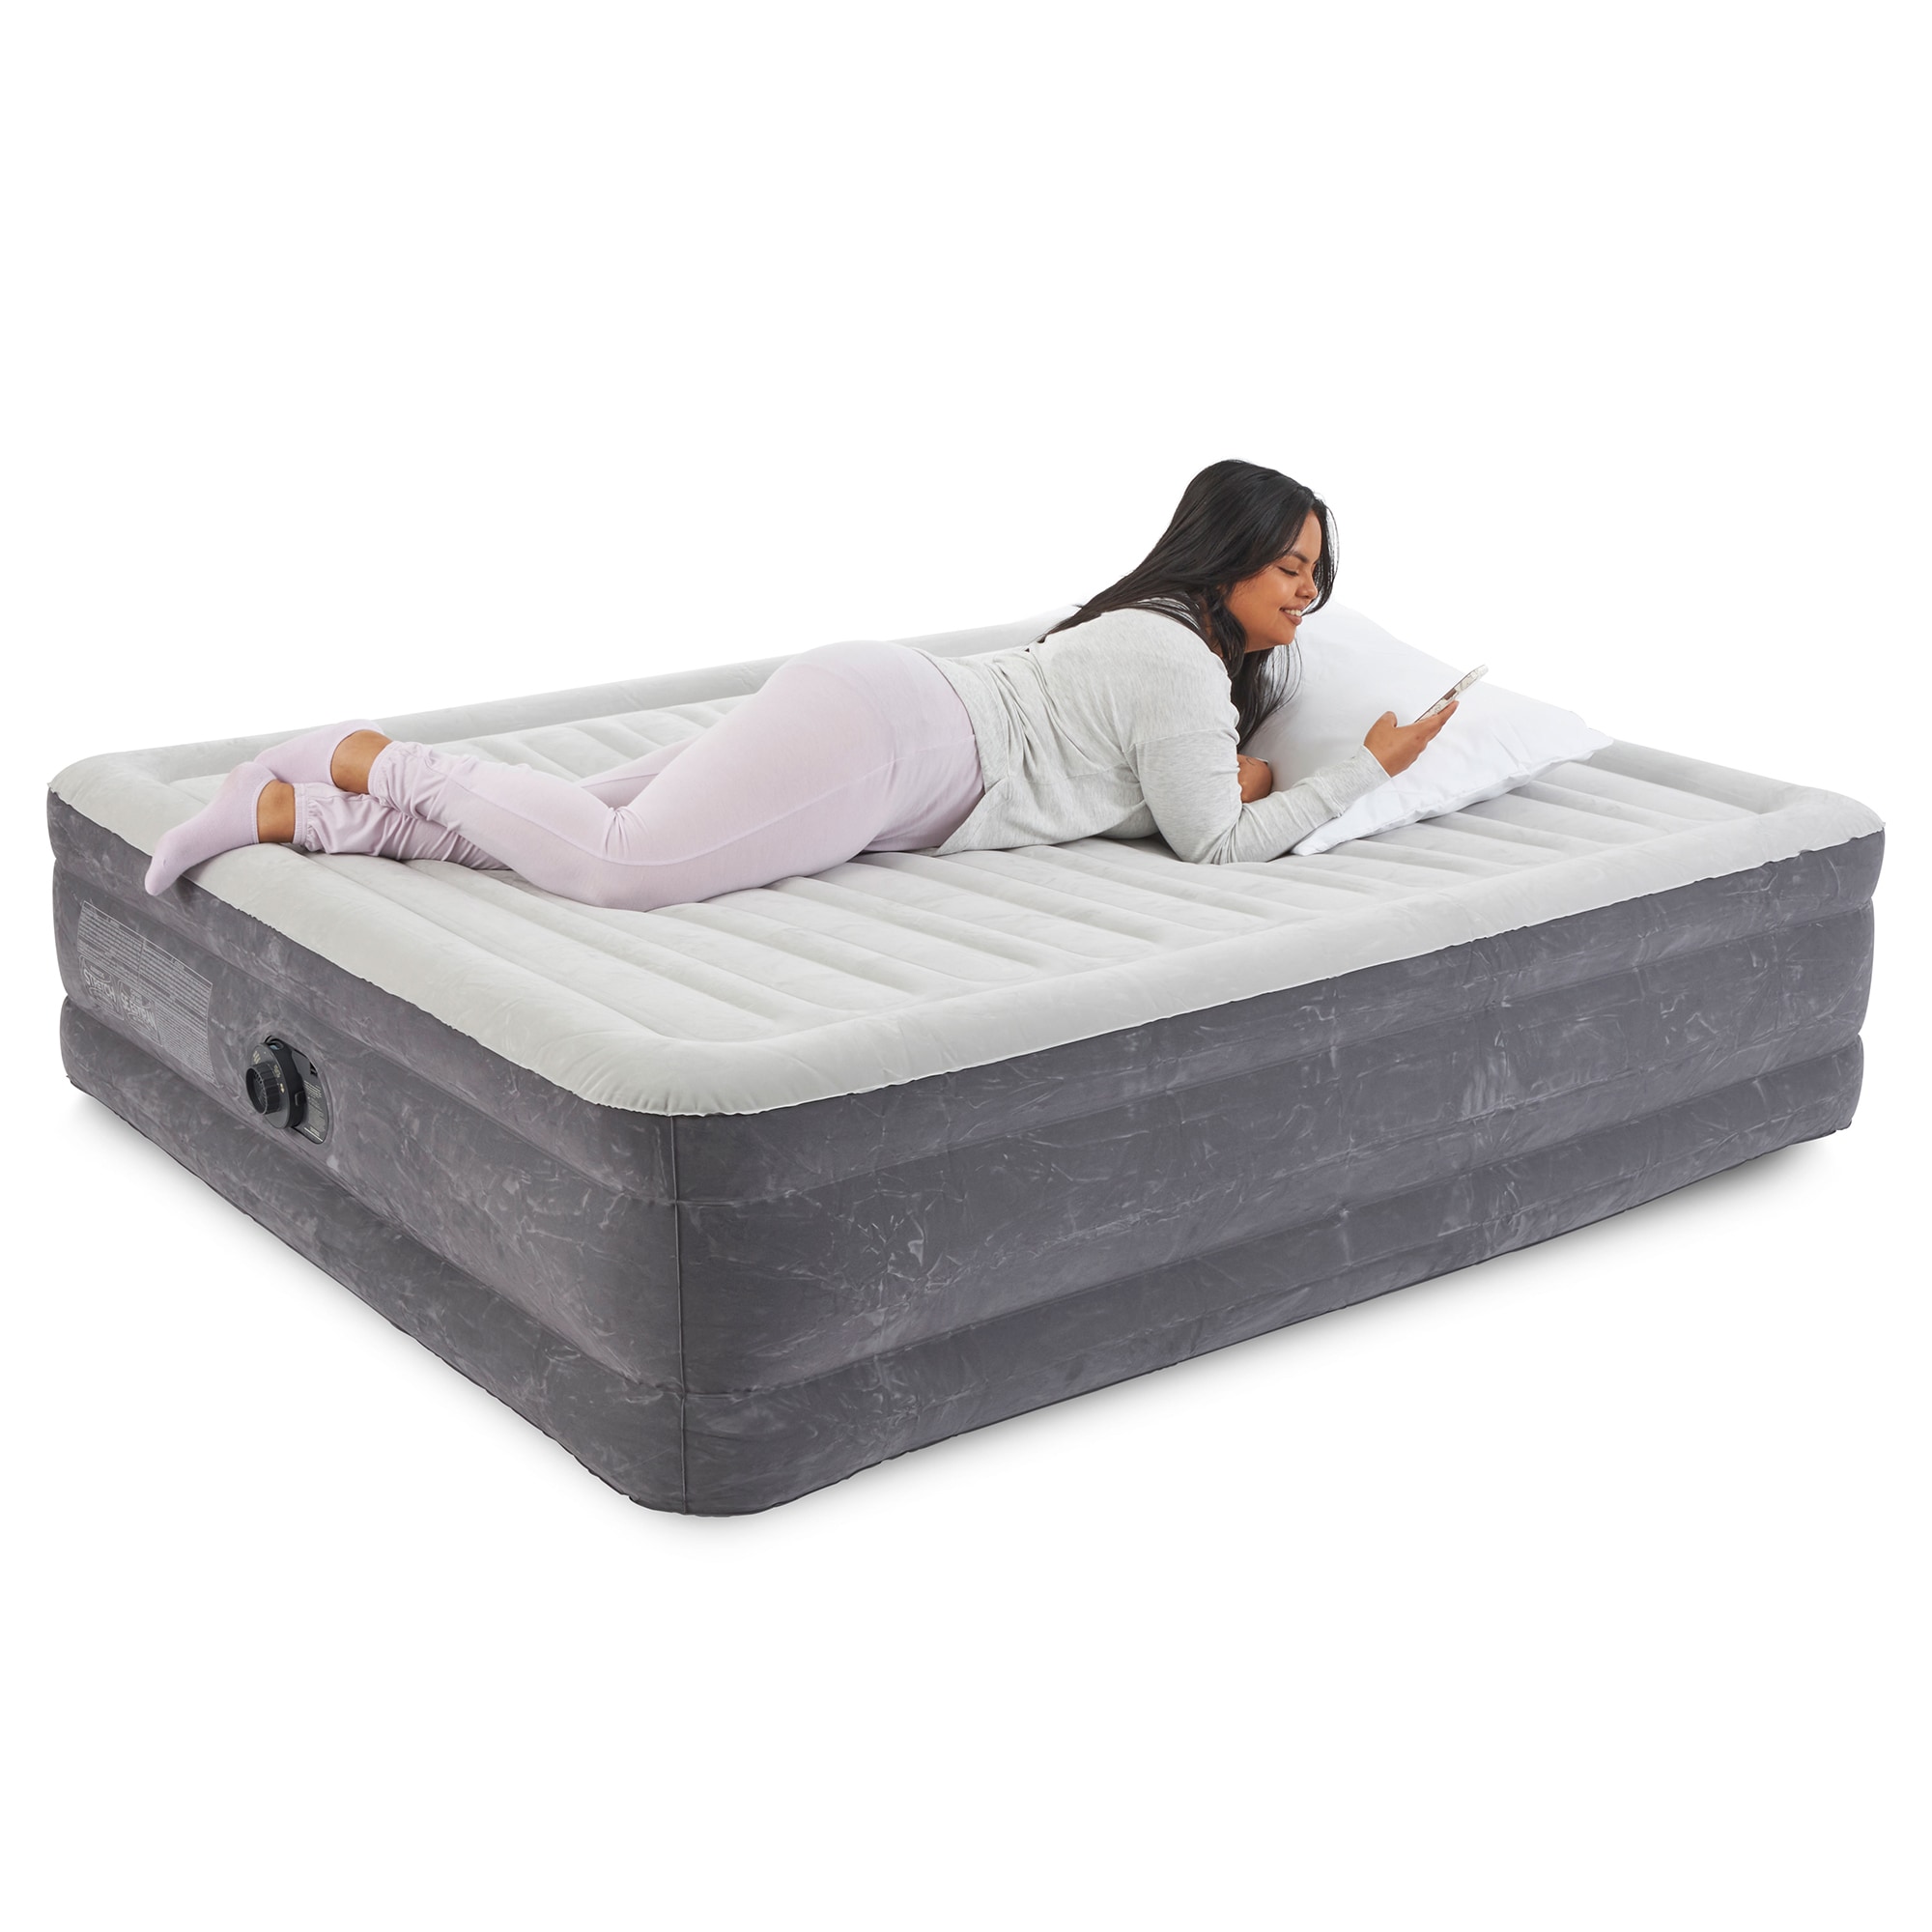 Flocking Inflatable PVC Air Beds Mattresses for Home Indoor and Outdoor Use  